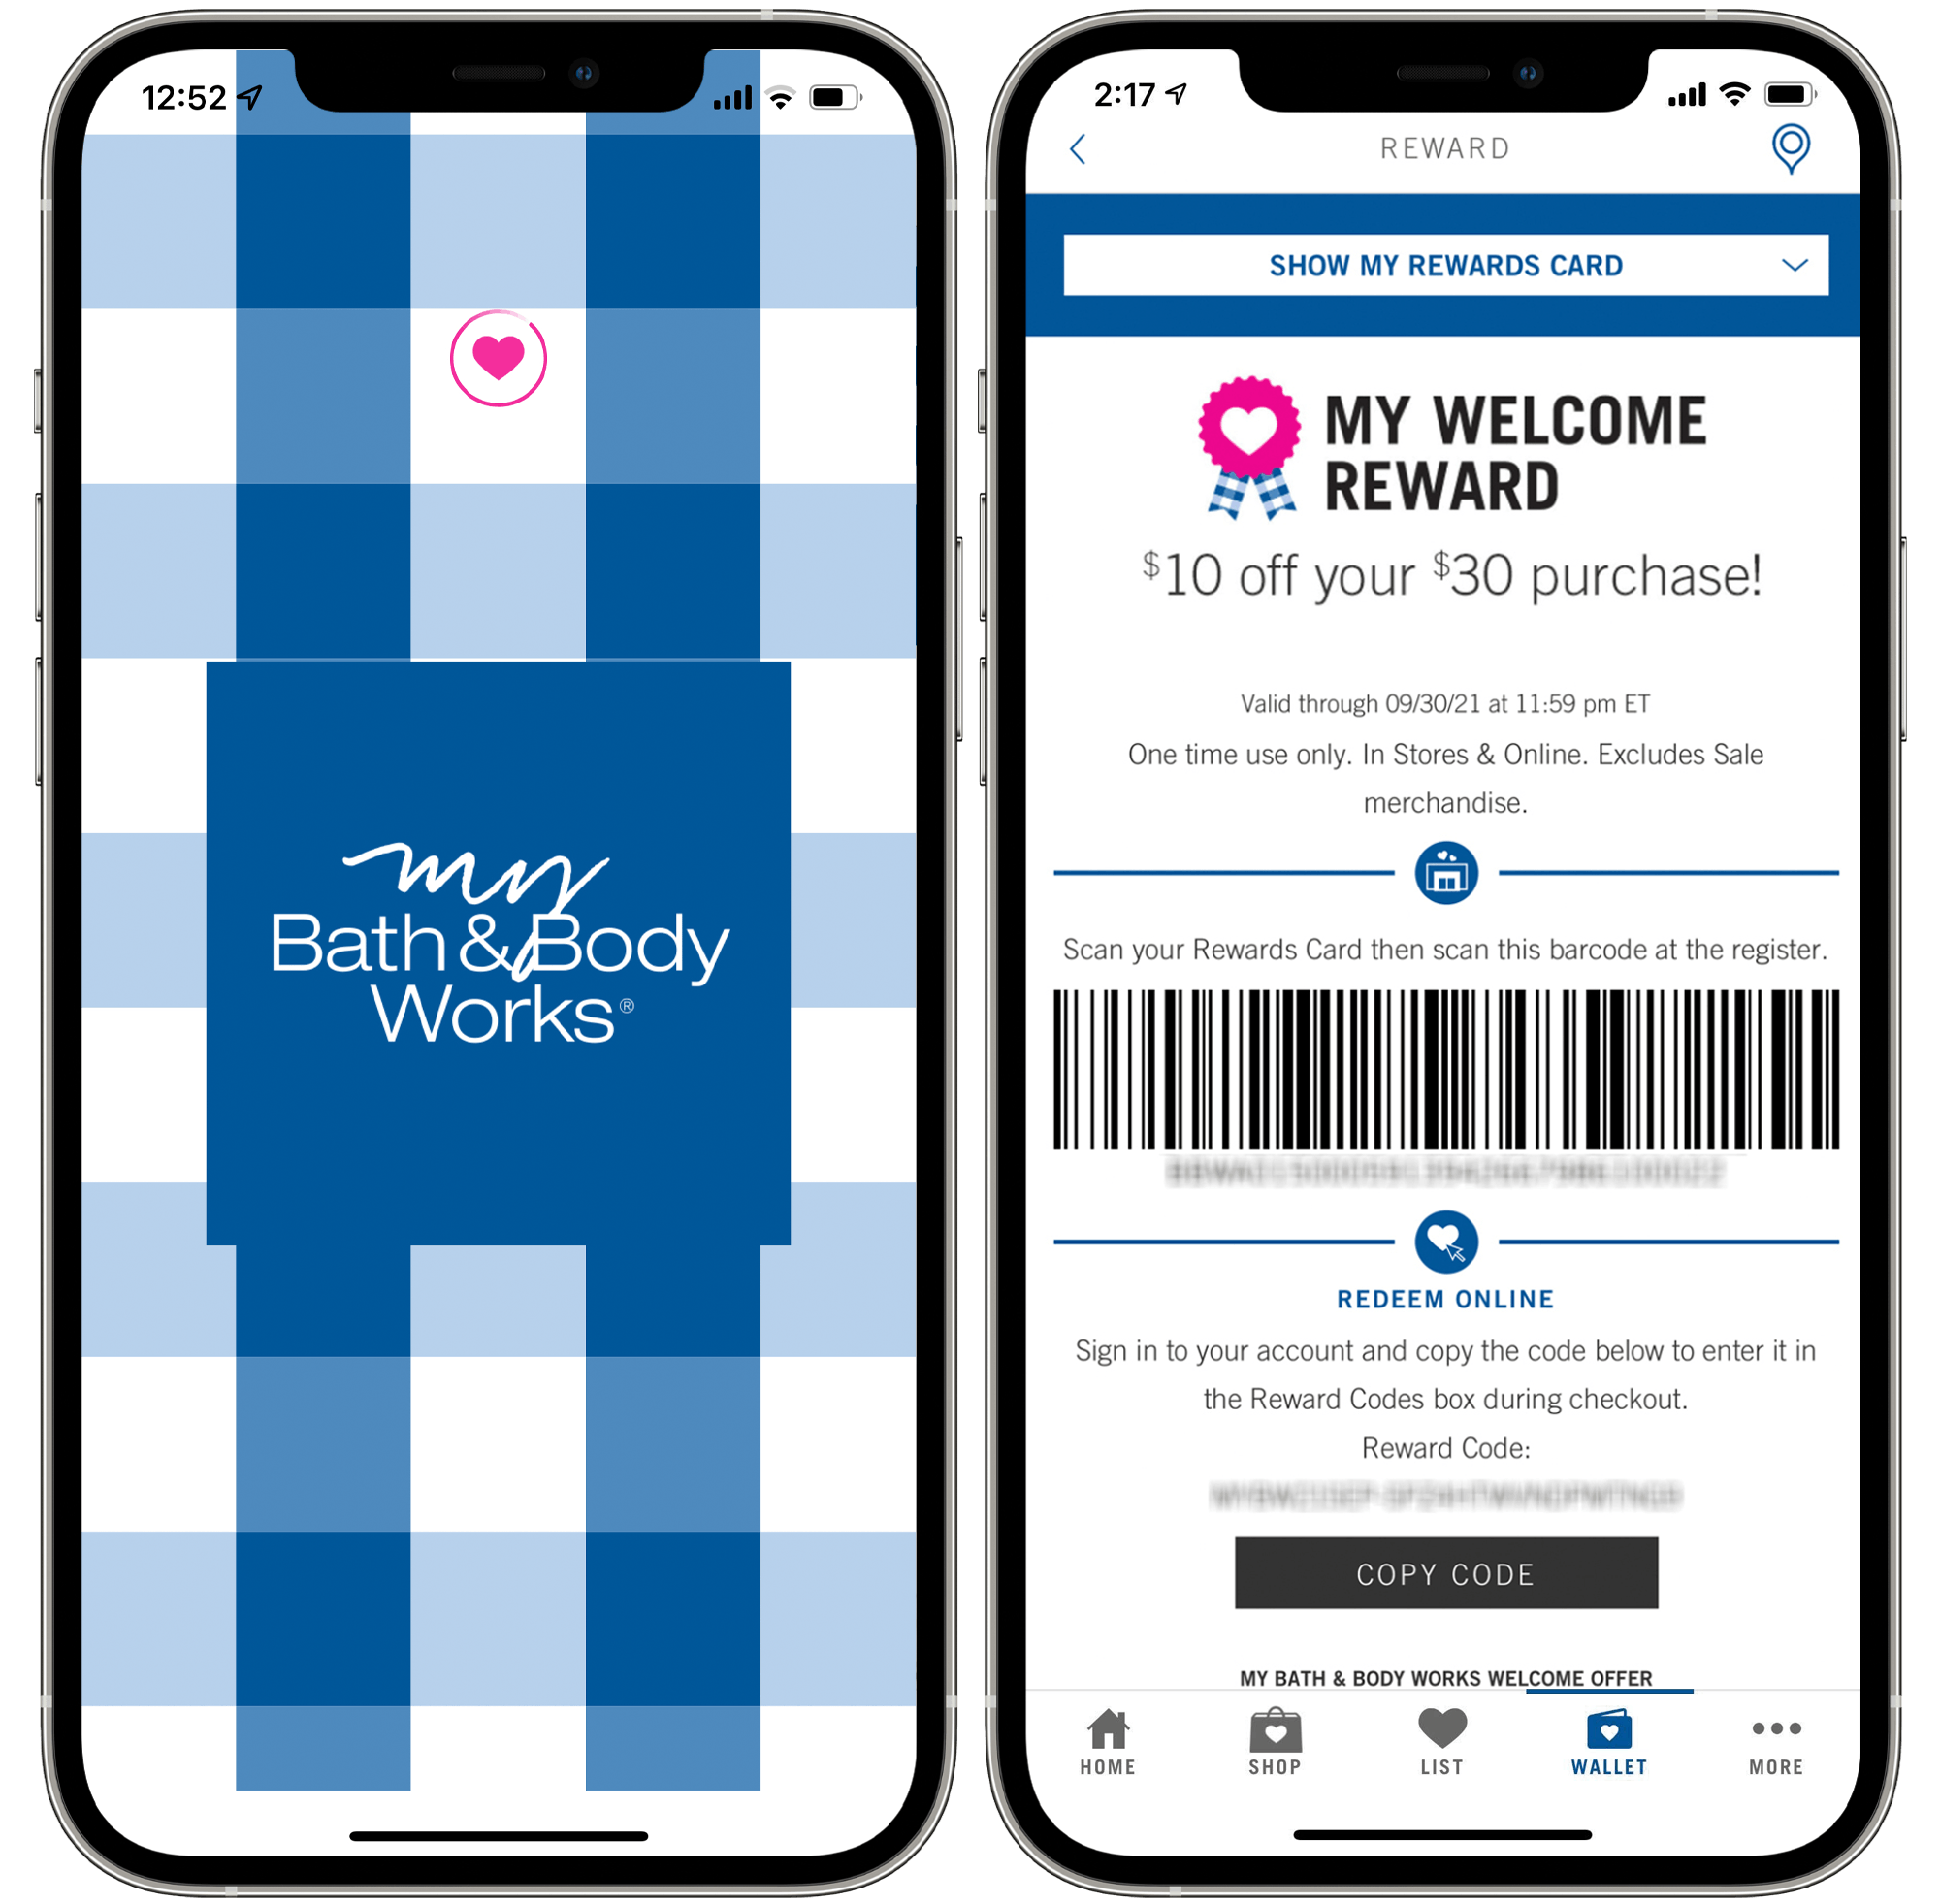 Cell phone screens displaying the My Bath & Body Works app home screen and a My Welcome Reward coupon.